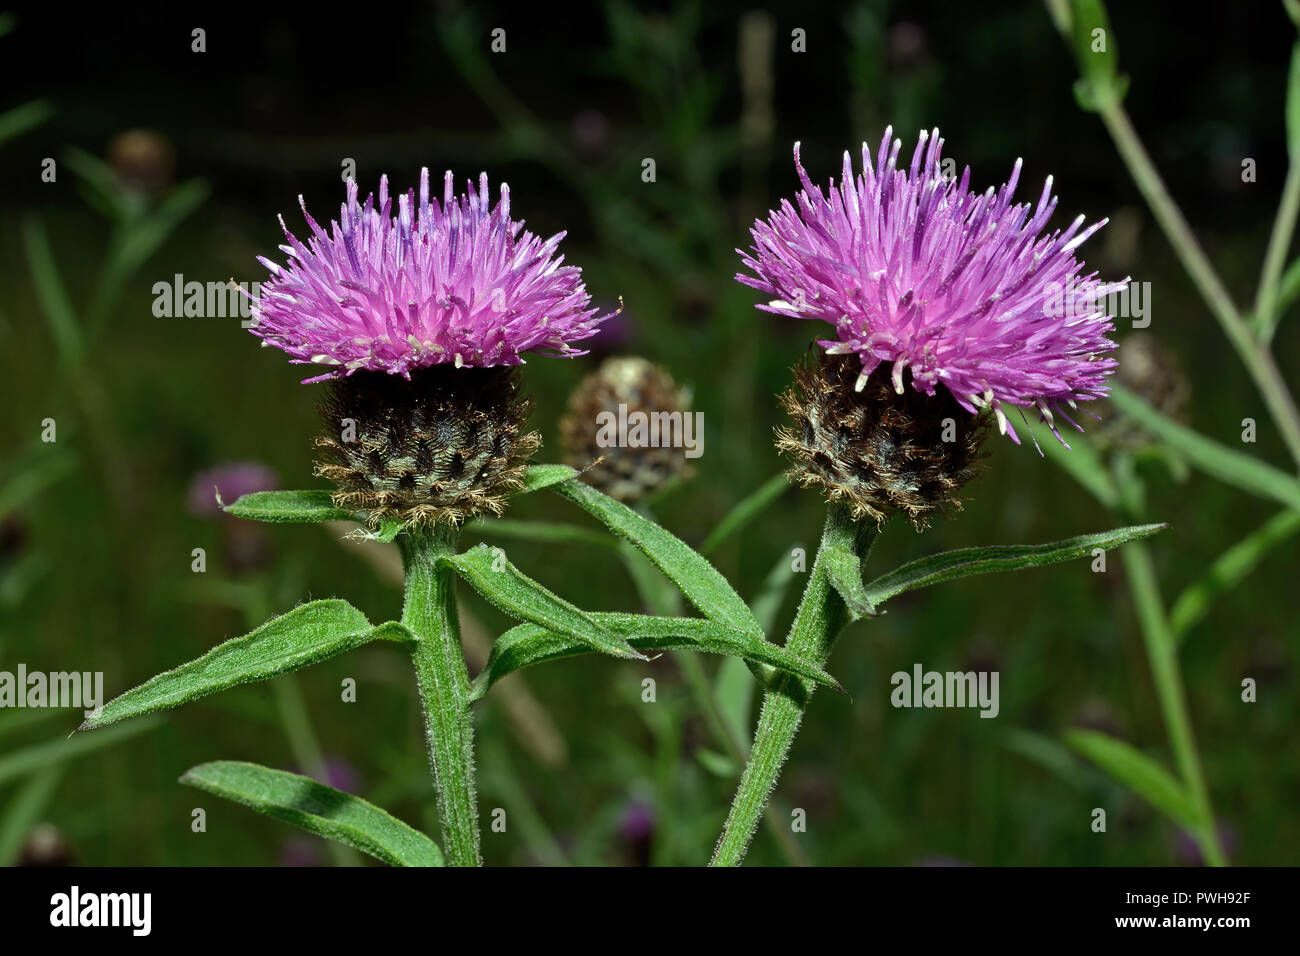 Centaurea nigra (lesser knapweed) is a perennial herb native to Europe where it occurs in meadows and other grassland habitats. Stock Photo